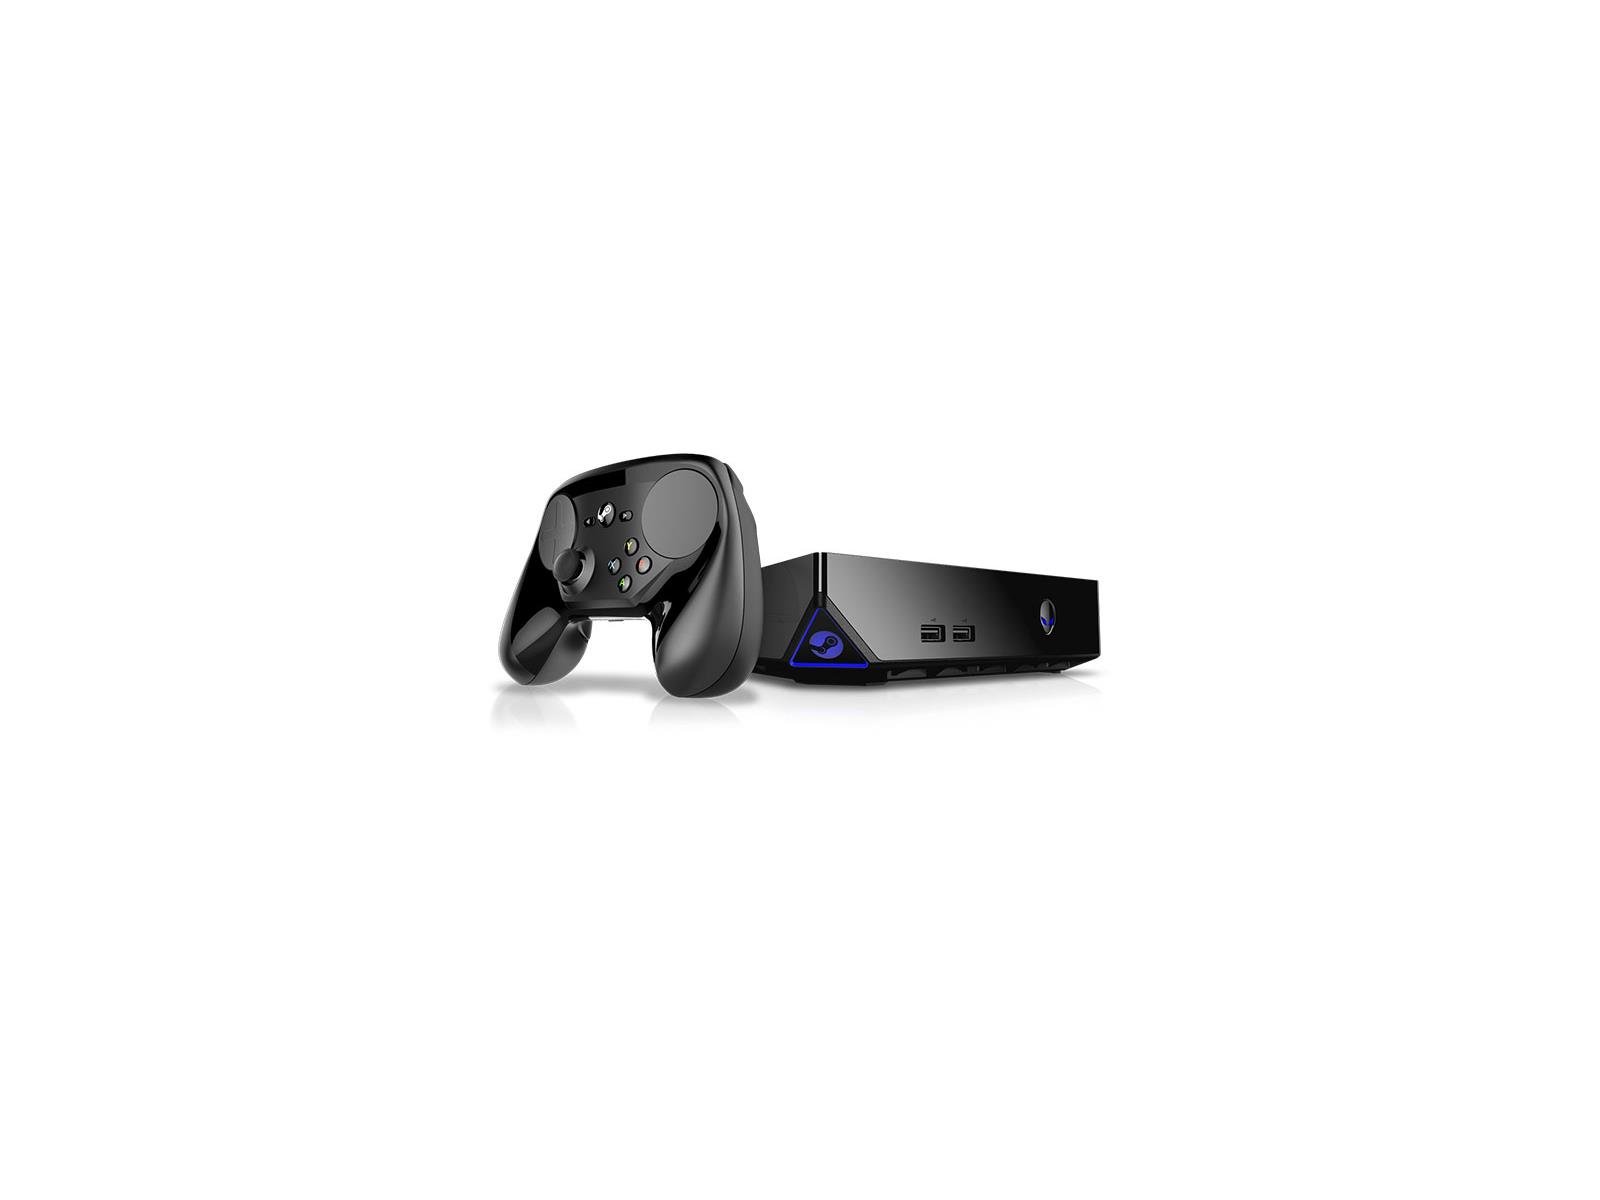 Alienware Core I7 Steam Machine 649 Plus 50 Foscam Wireless Ip Camera 70 Android Console And More Hothardware